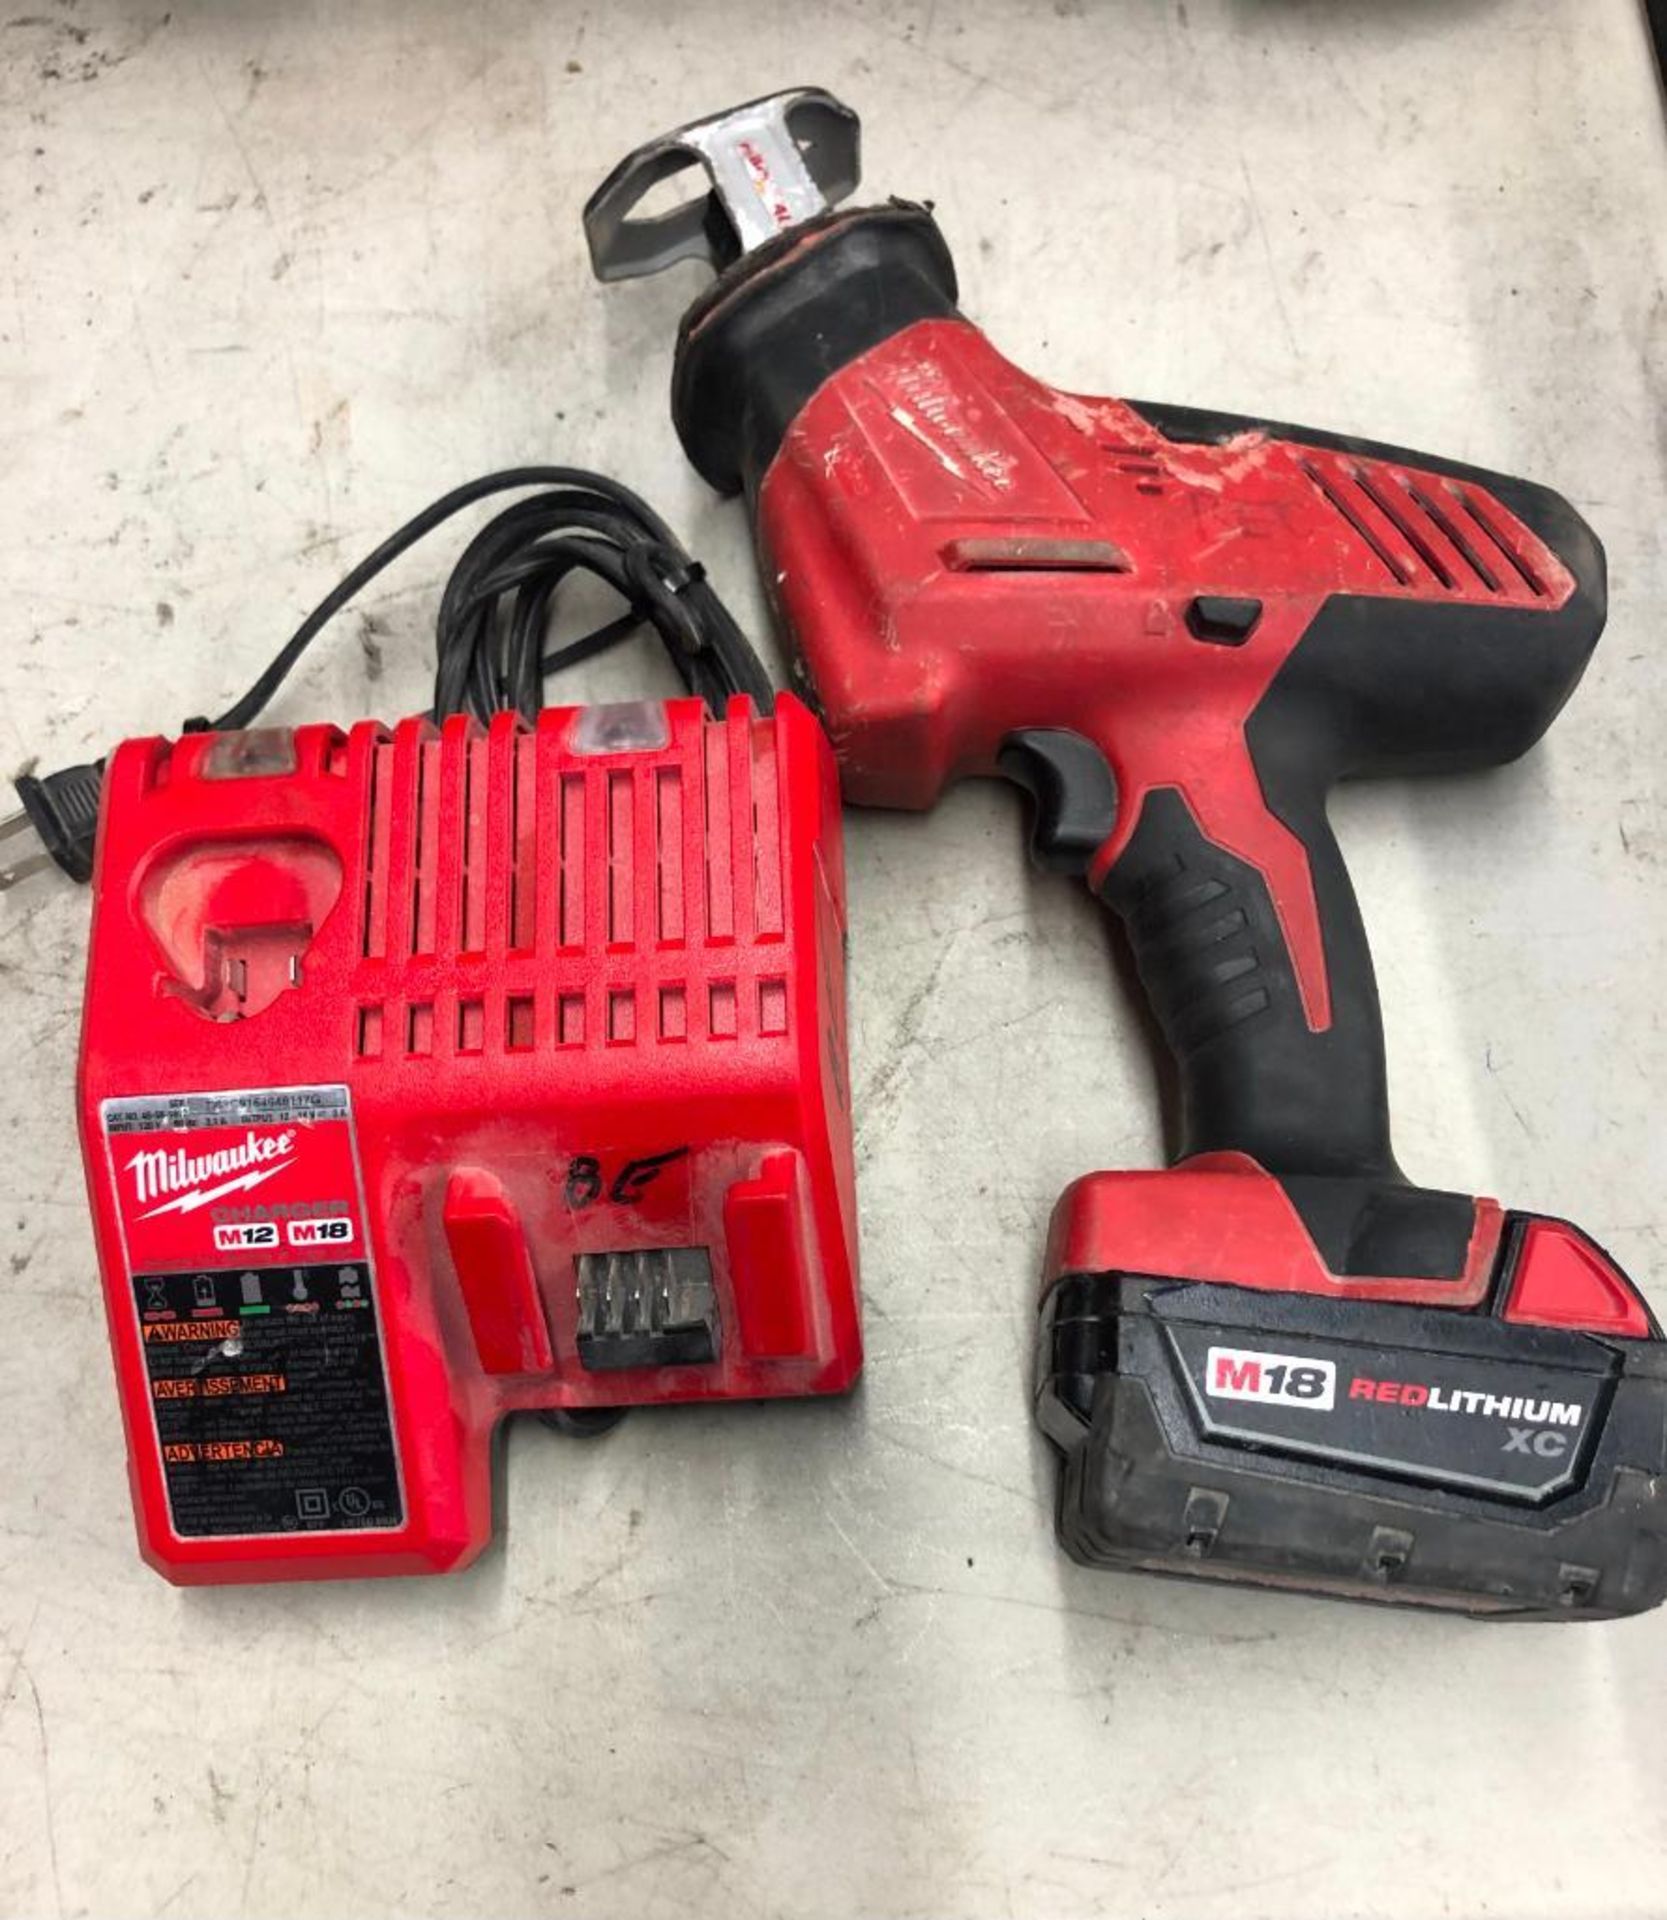 MILWAUKEE CORDLESS HACK SAW, S/N C41DD153001986, W/ (1) BATTERY AND CHARGER